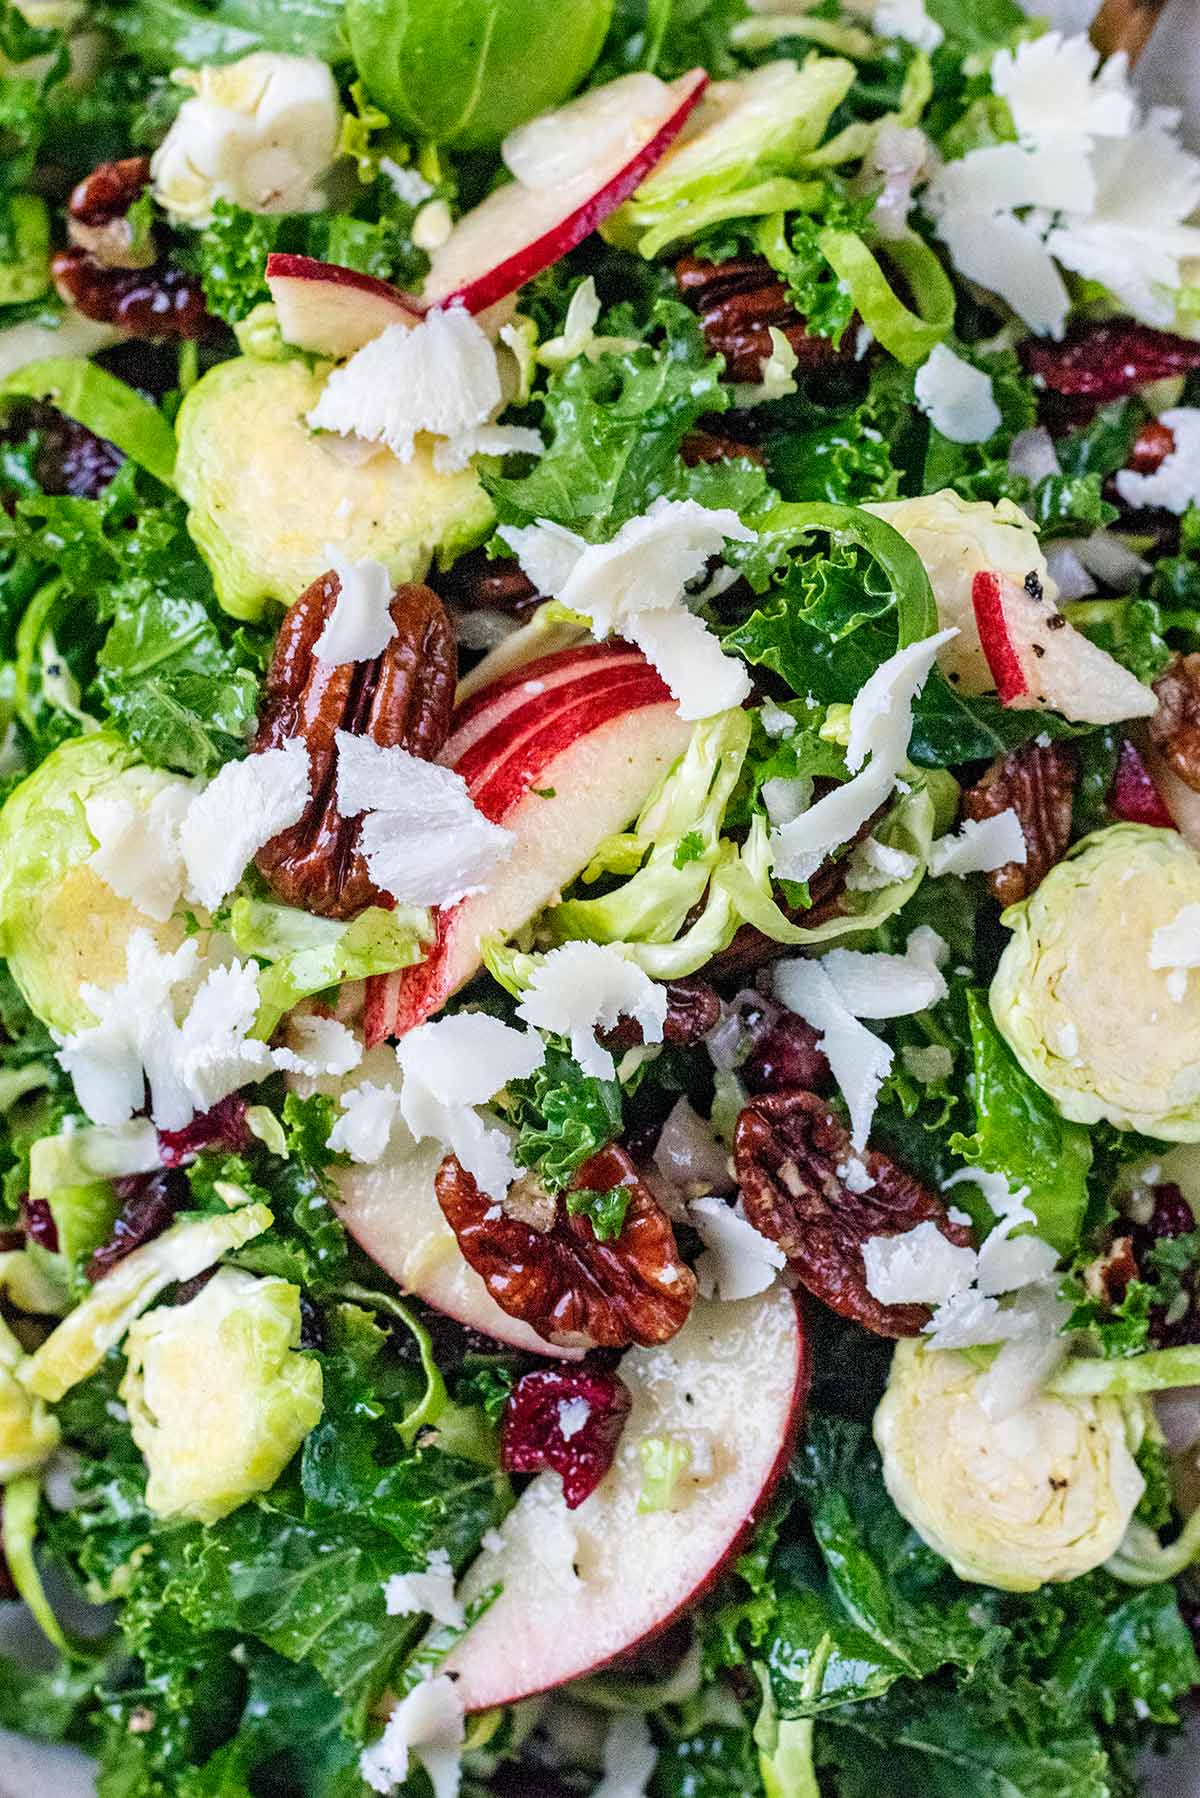 Sliced apples, pecans and Parmesan shavings mixed into salad.